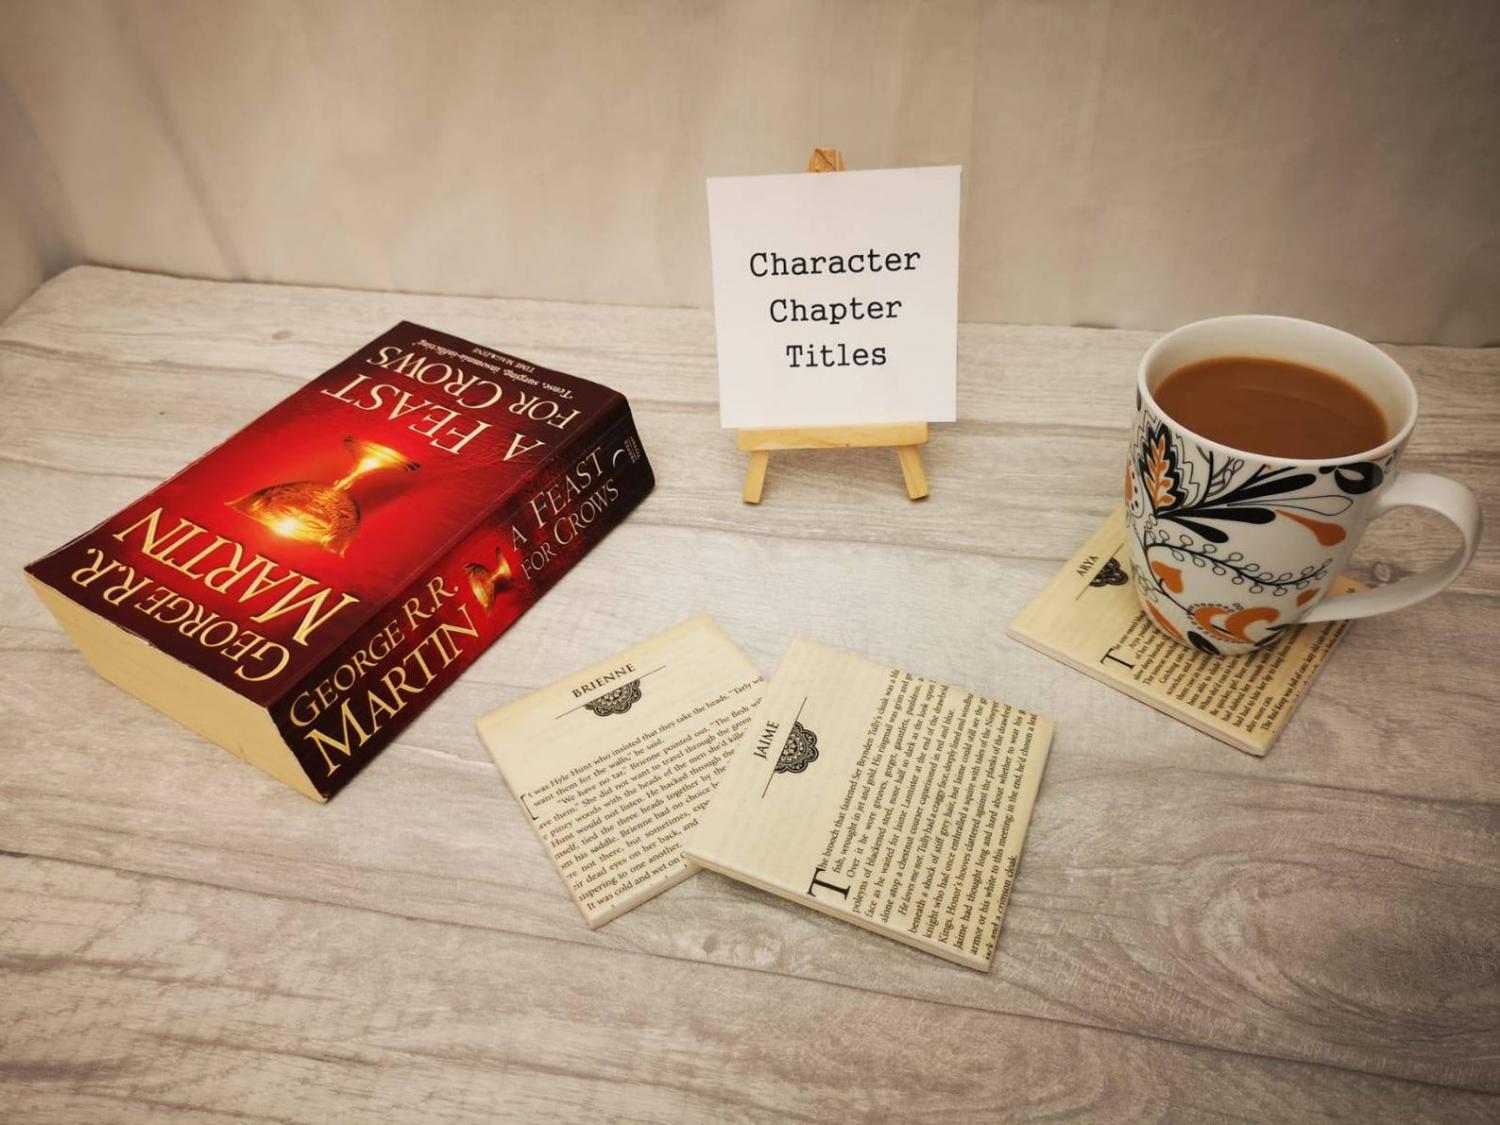 Game Of Thrones Novel Coasters Let You Read a Page Every Time You Put Your Cup Down